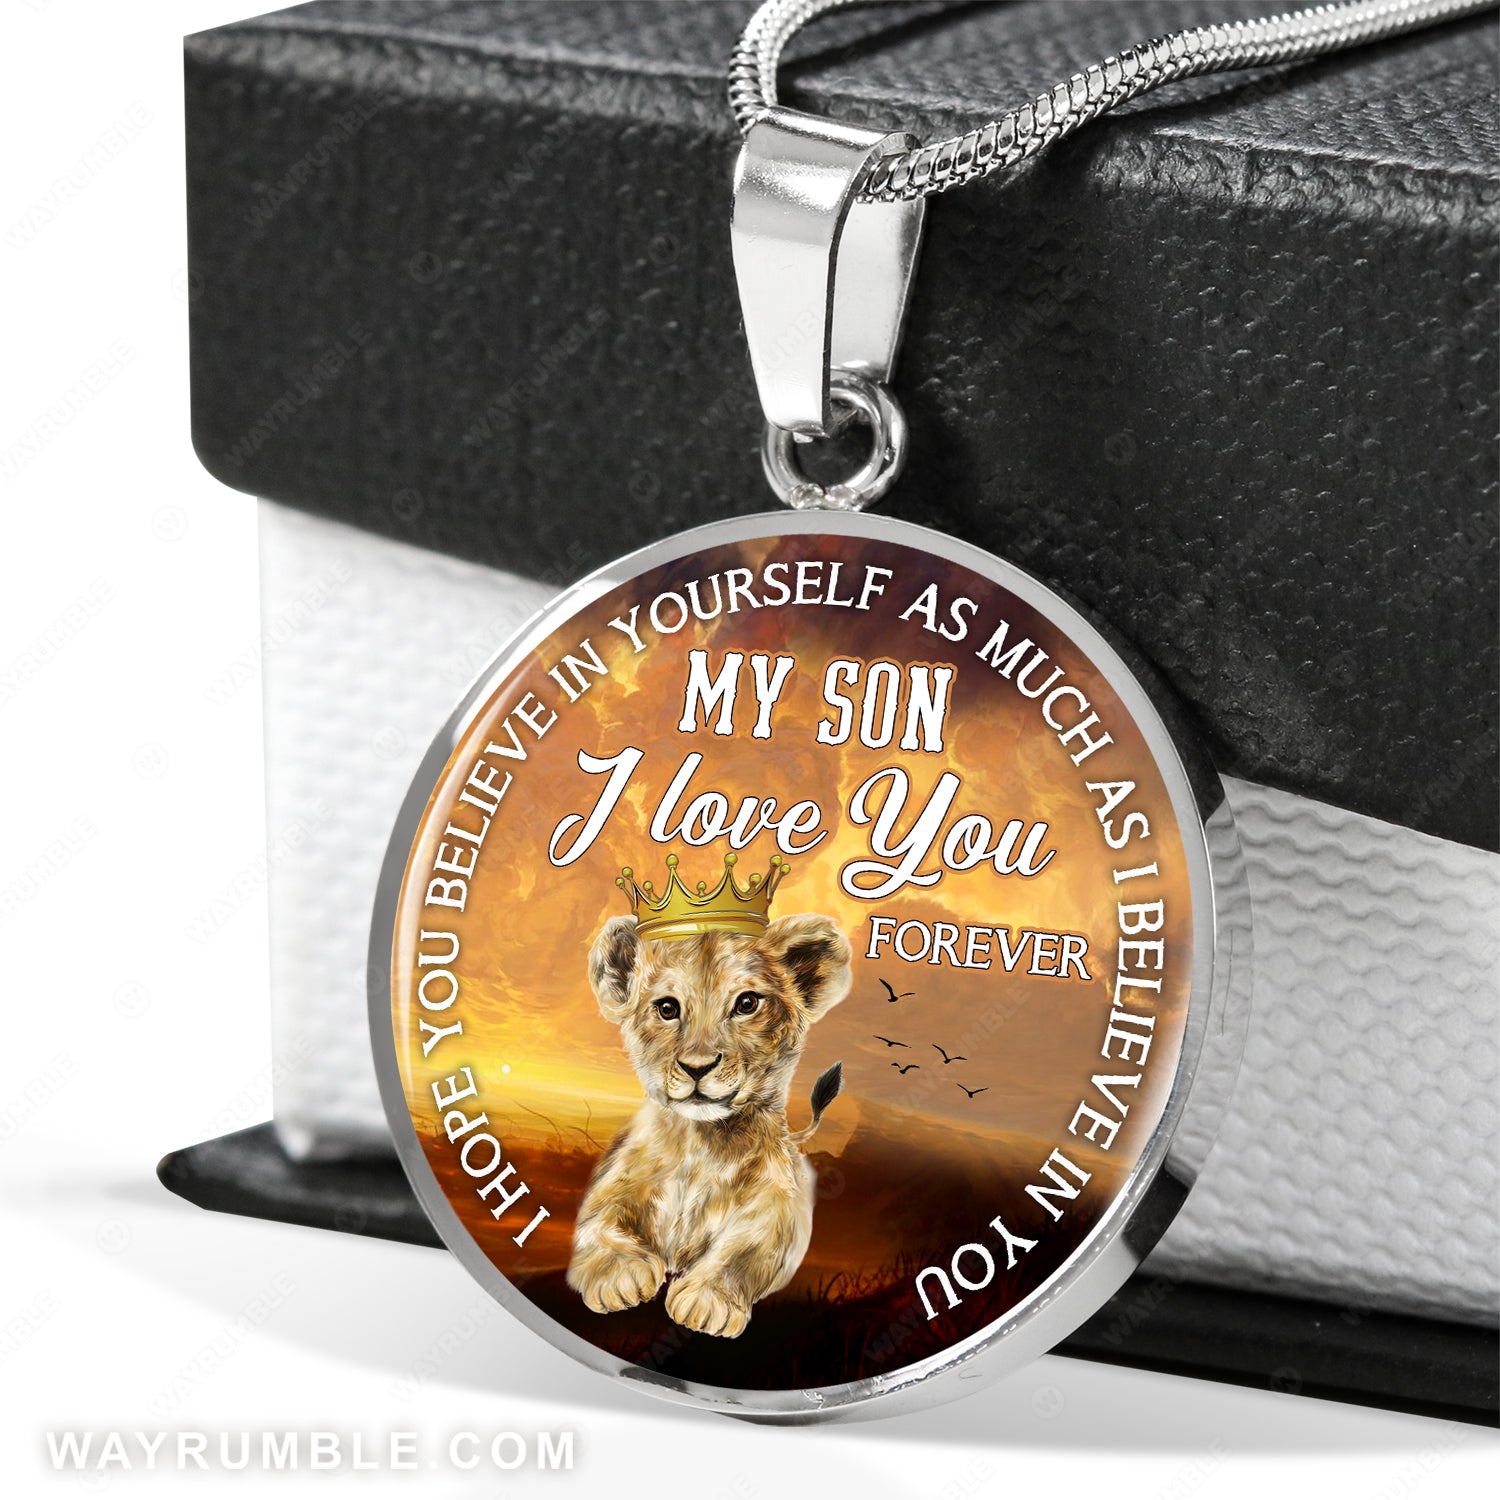 To my son, Lion cub painting, I love you forever - Family Circle Necklace